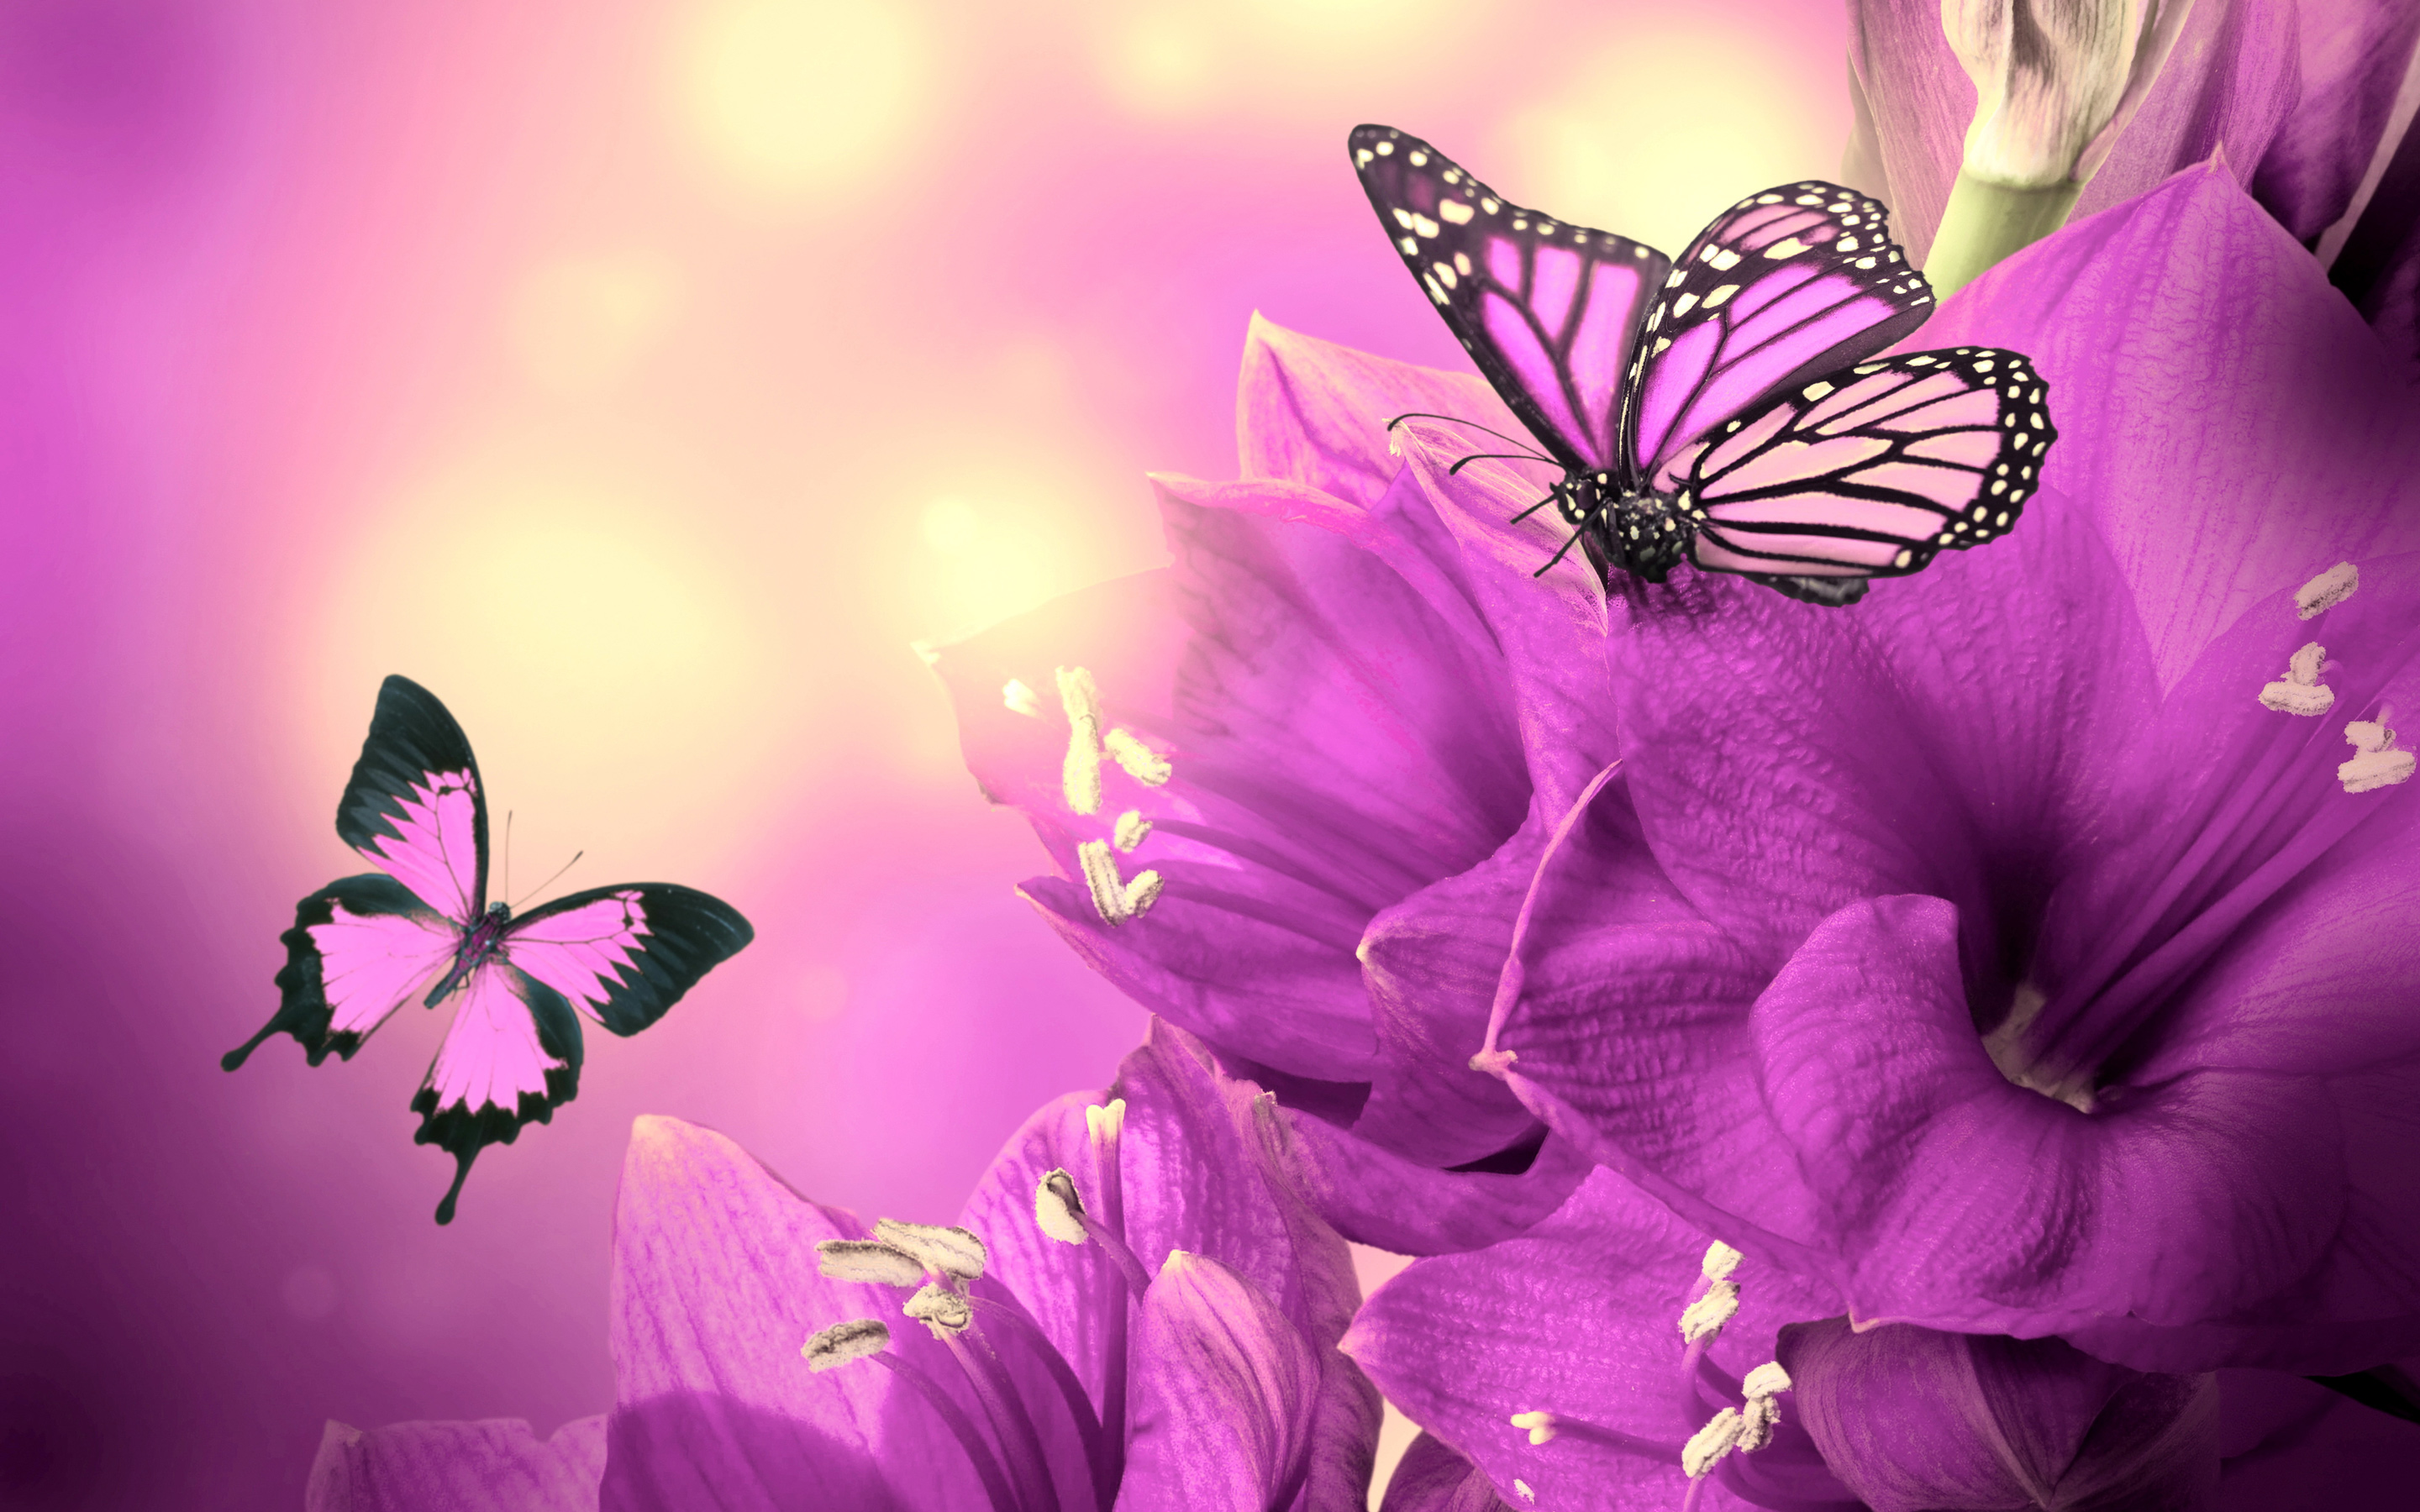 Real Purple Butterflies On Flowers Image Amp Pictures Becuo